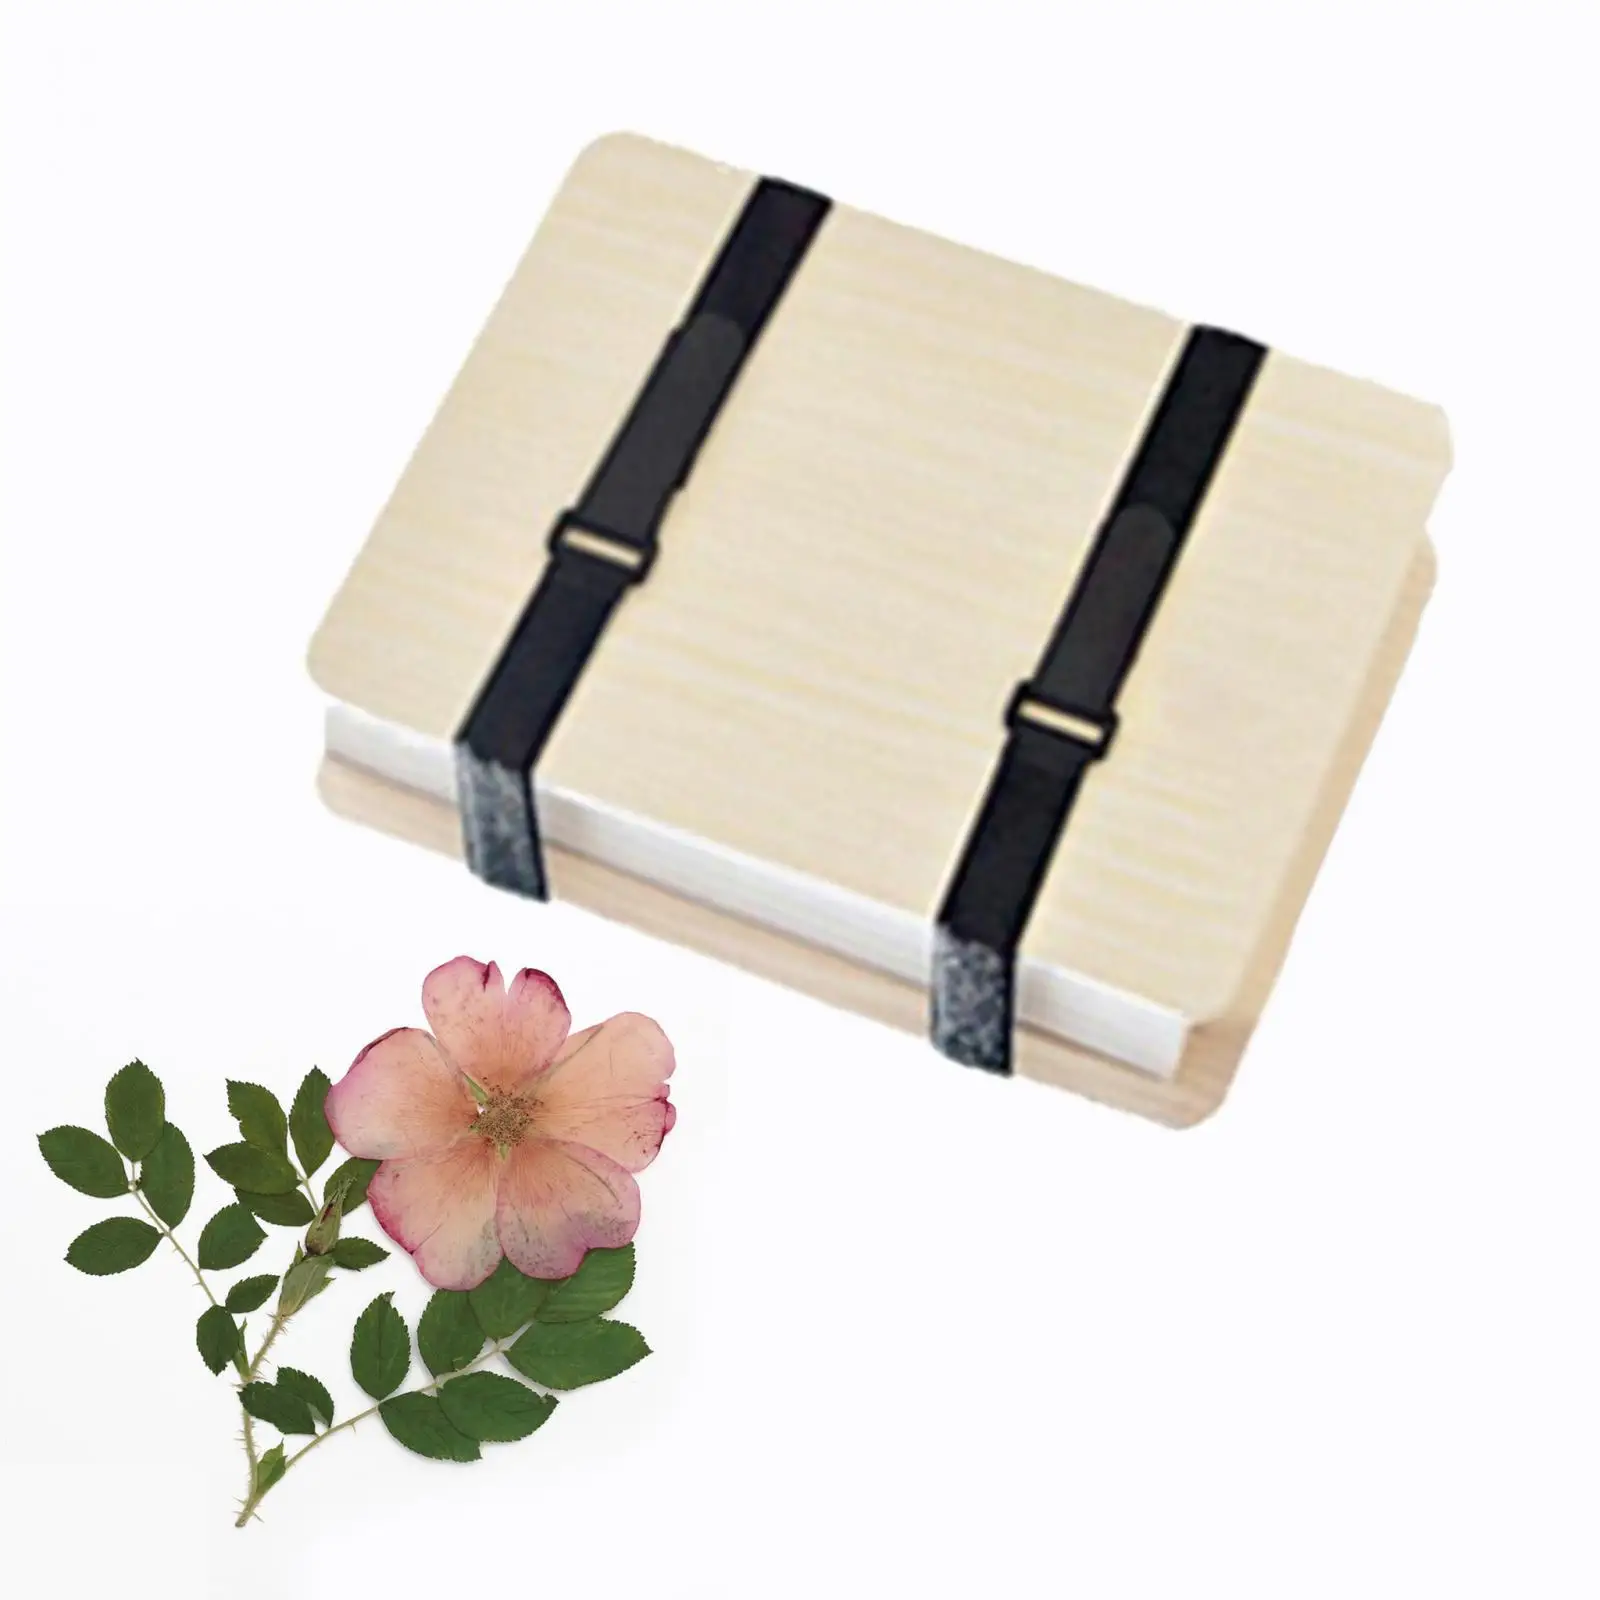 Press Flower Set 9x12.6Inches Professional Embossing Tool for Kids Adults DIY Pressed Flowers Handicrafts Flower Preservation